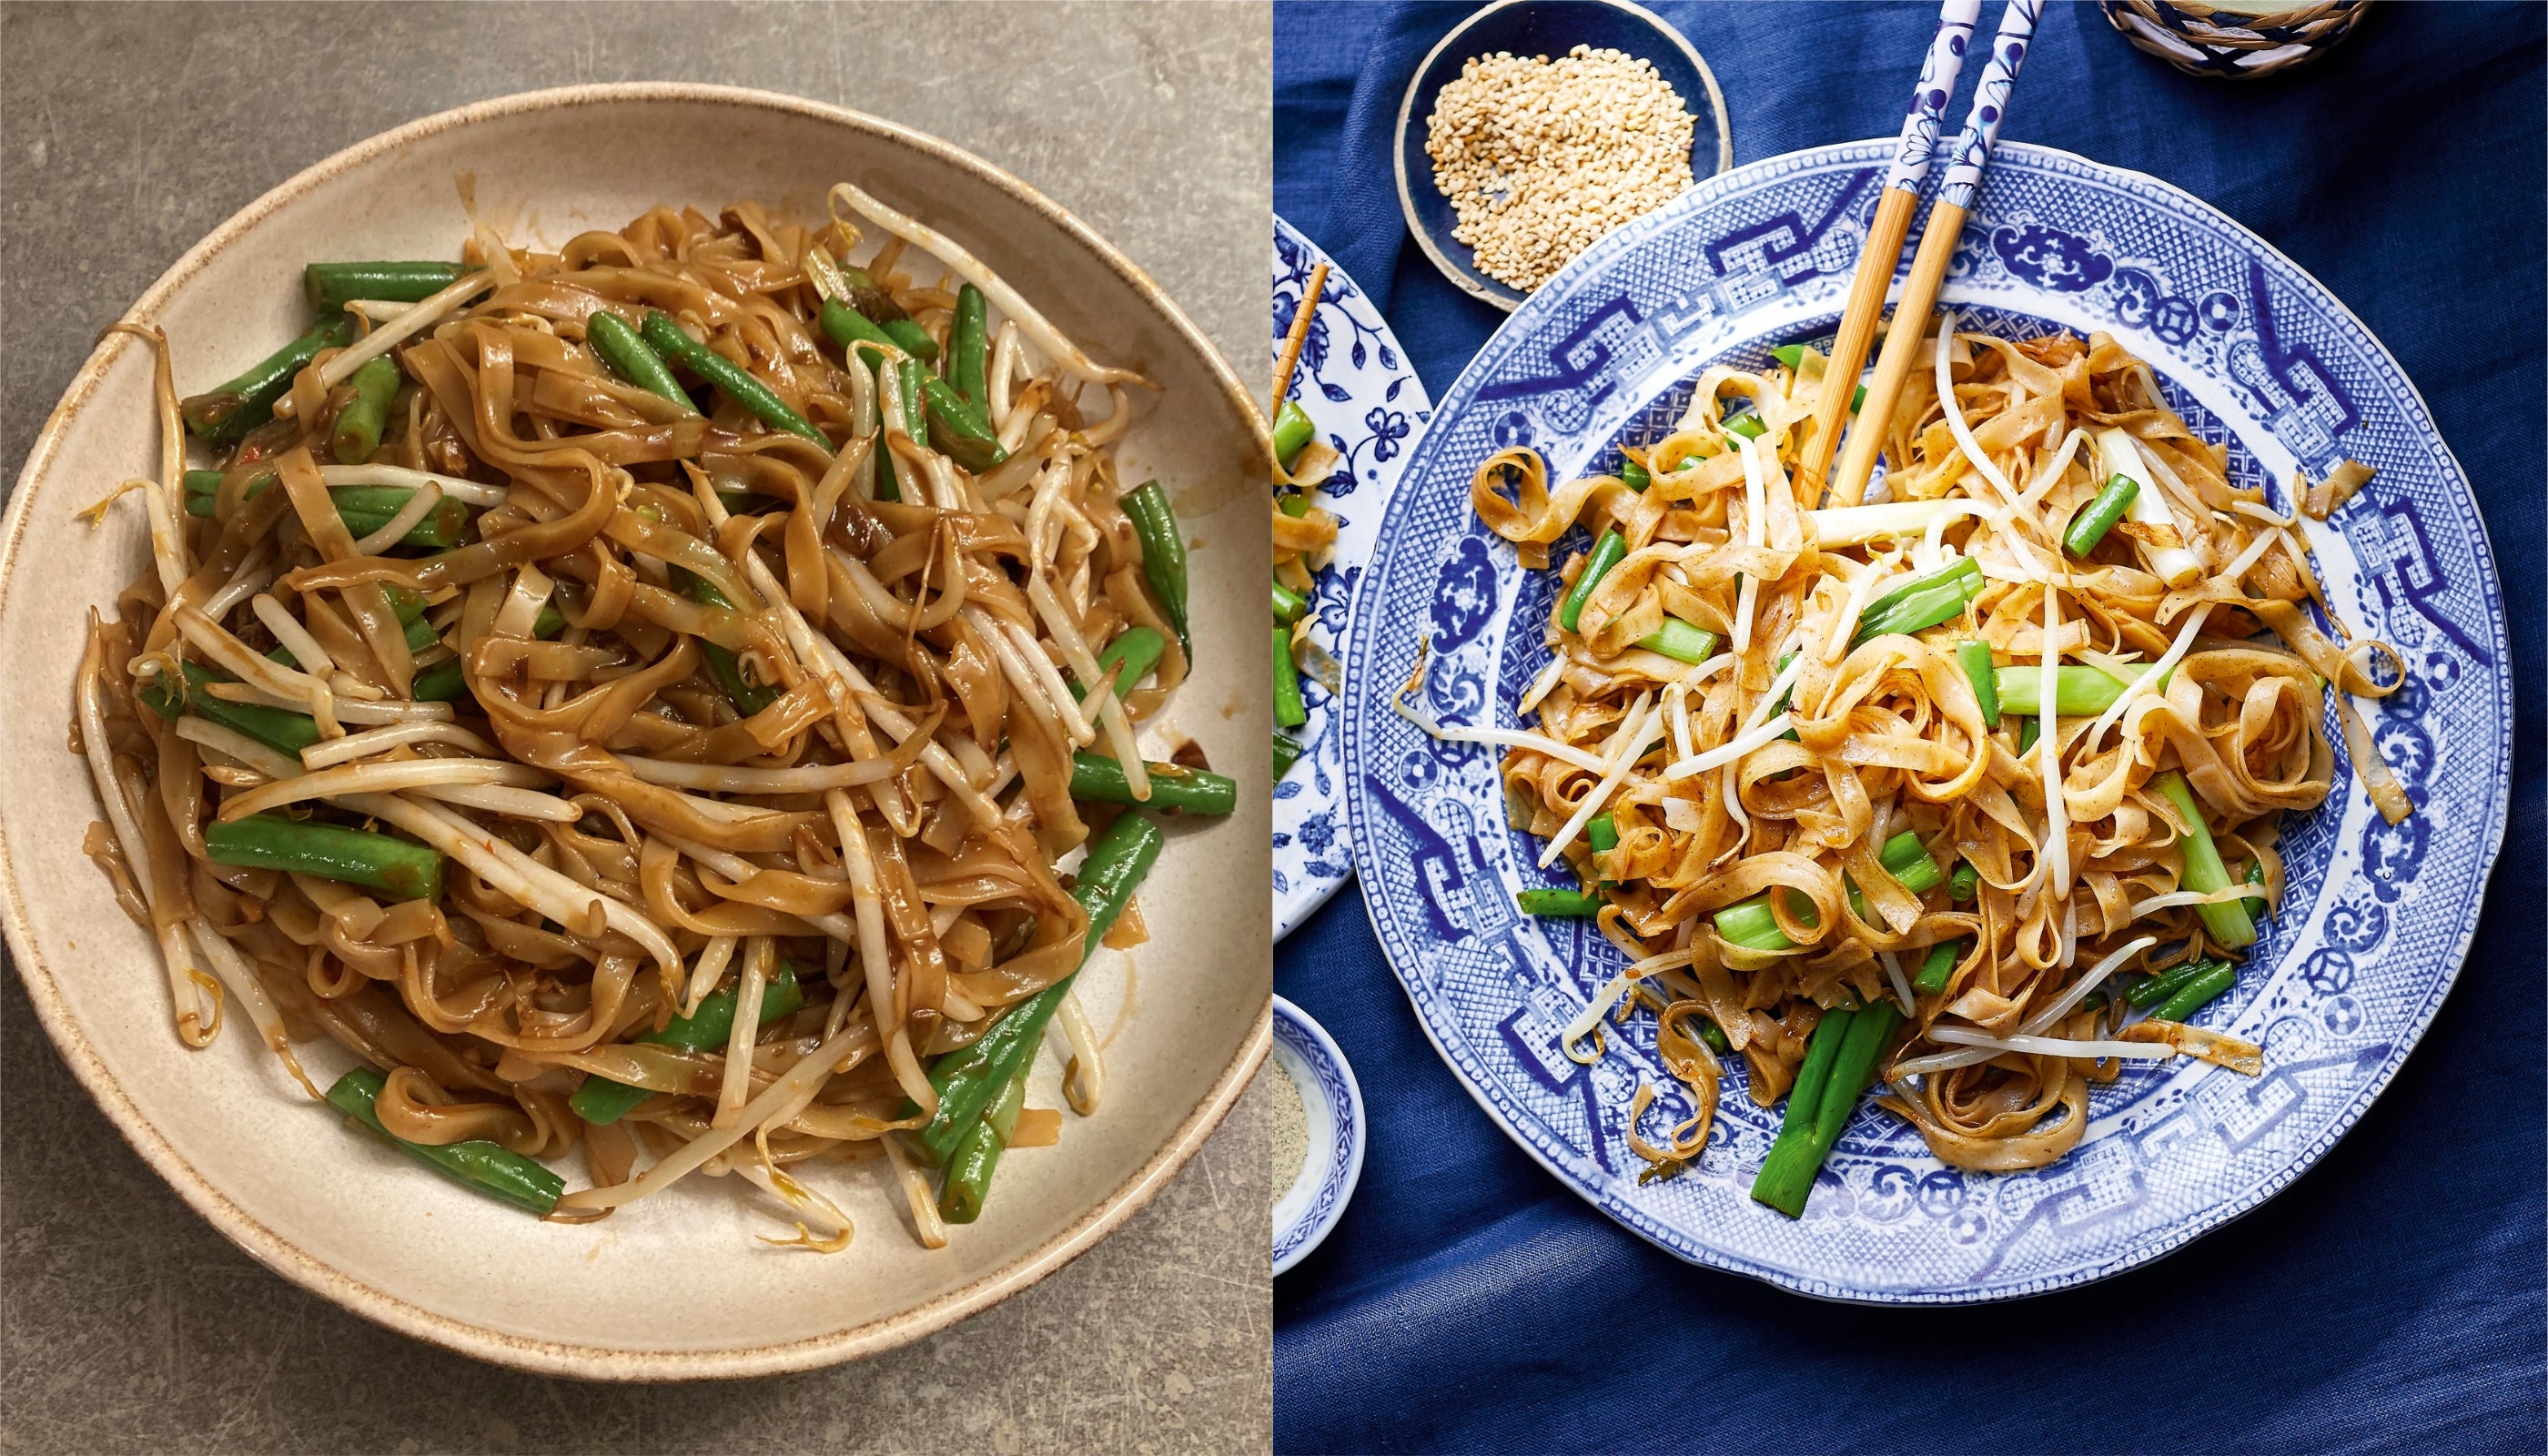 Prudence’s yellow bean noodle dish vs Wan’s